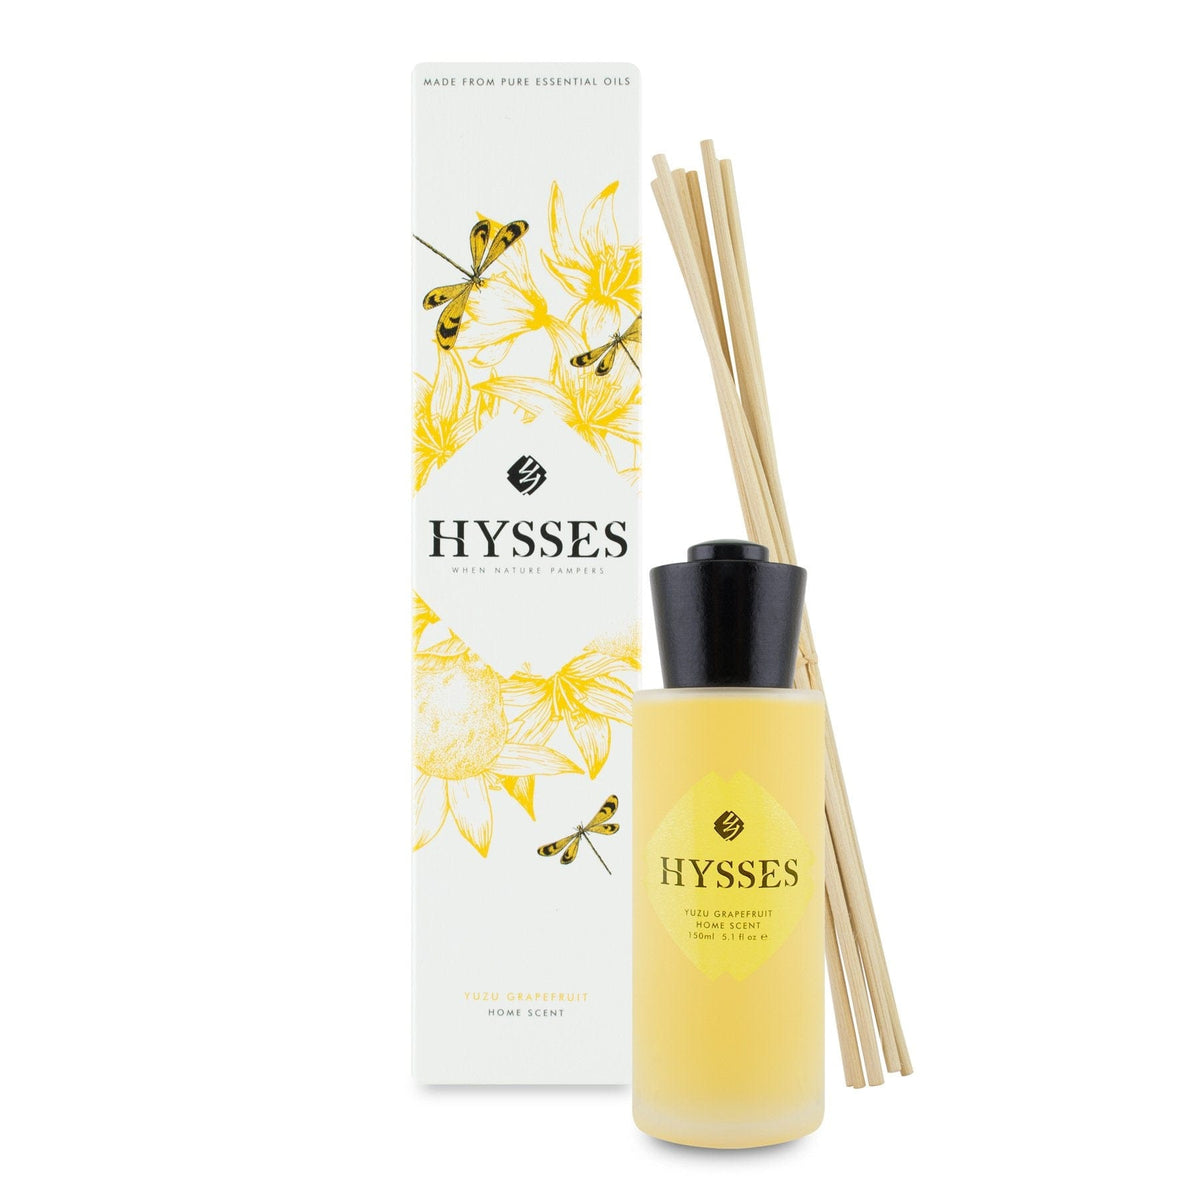 Hysses Home Scents 150ml Home Scent Reed Diffuser Yuzu Grapefruit